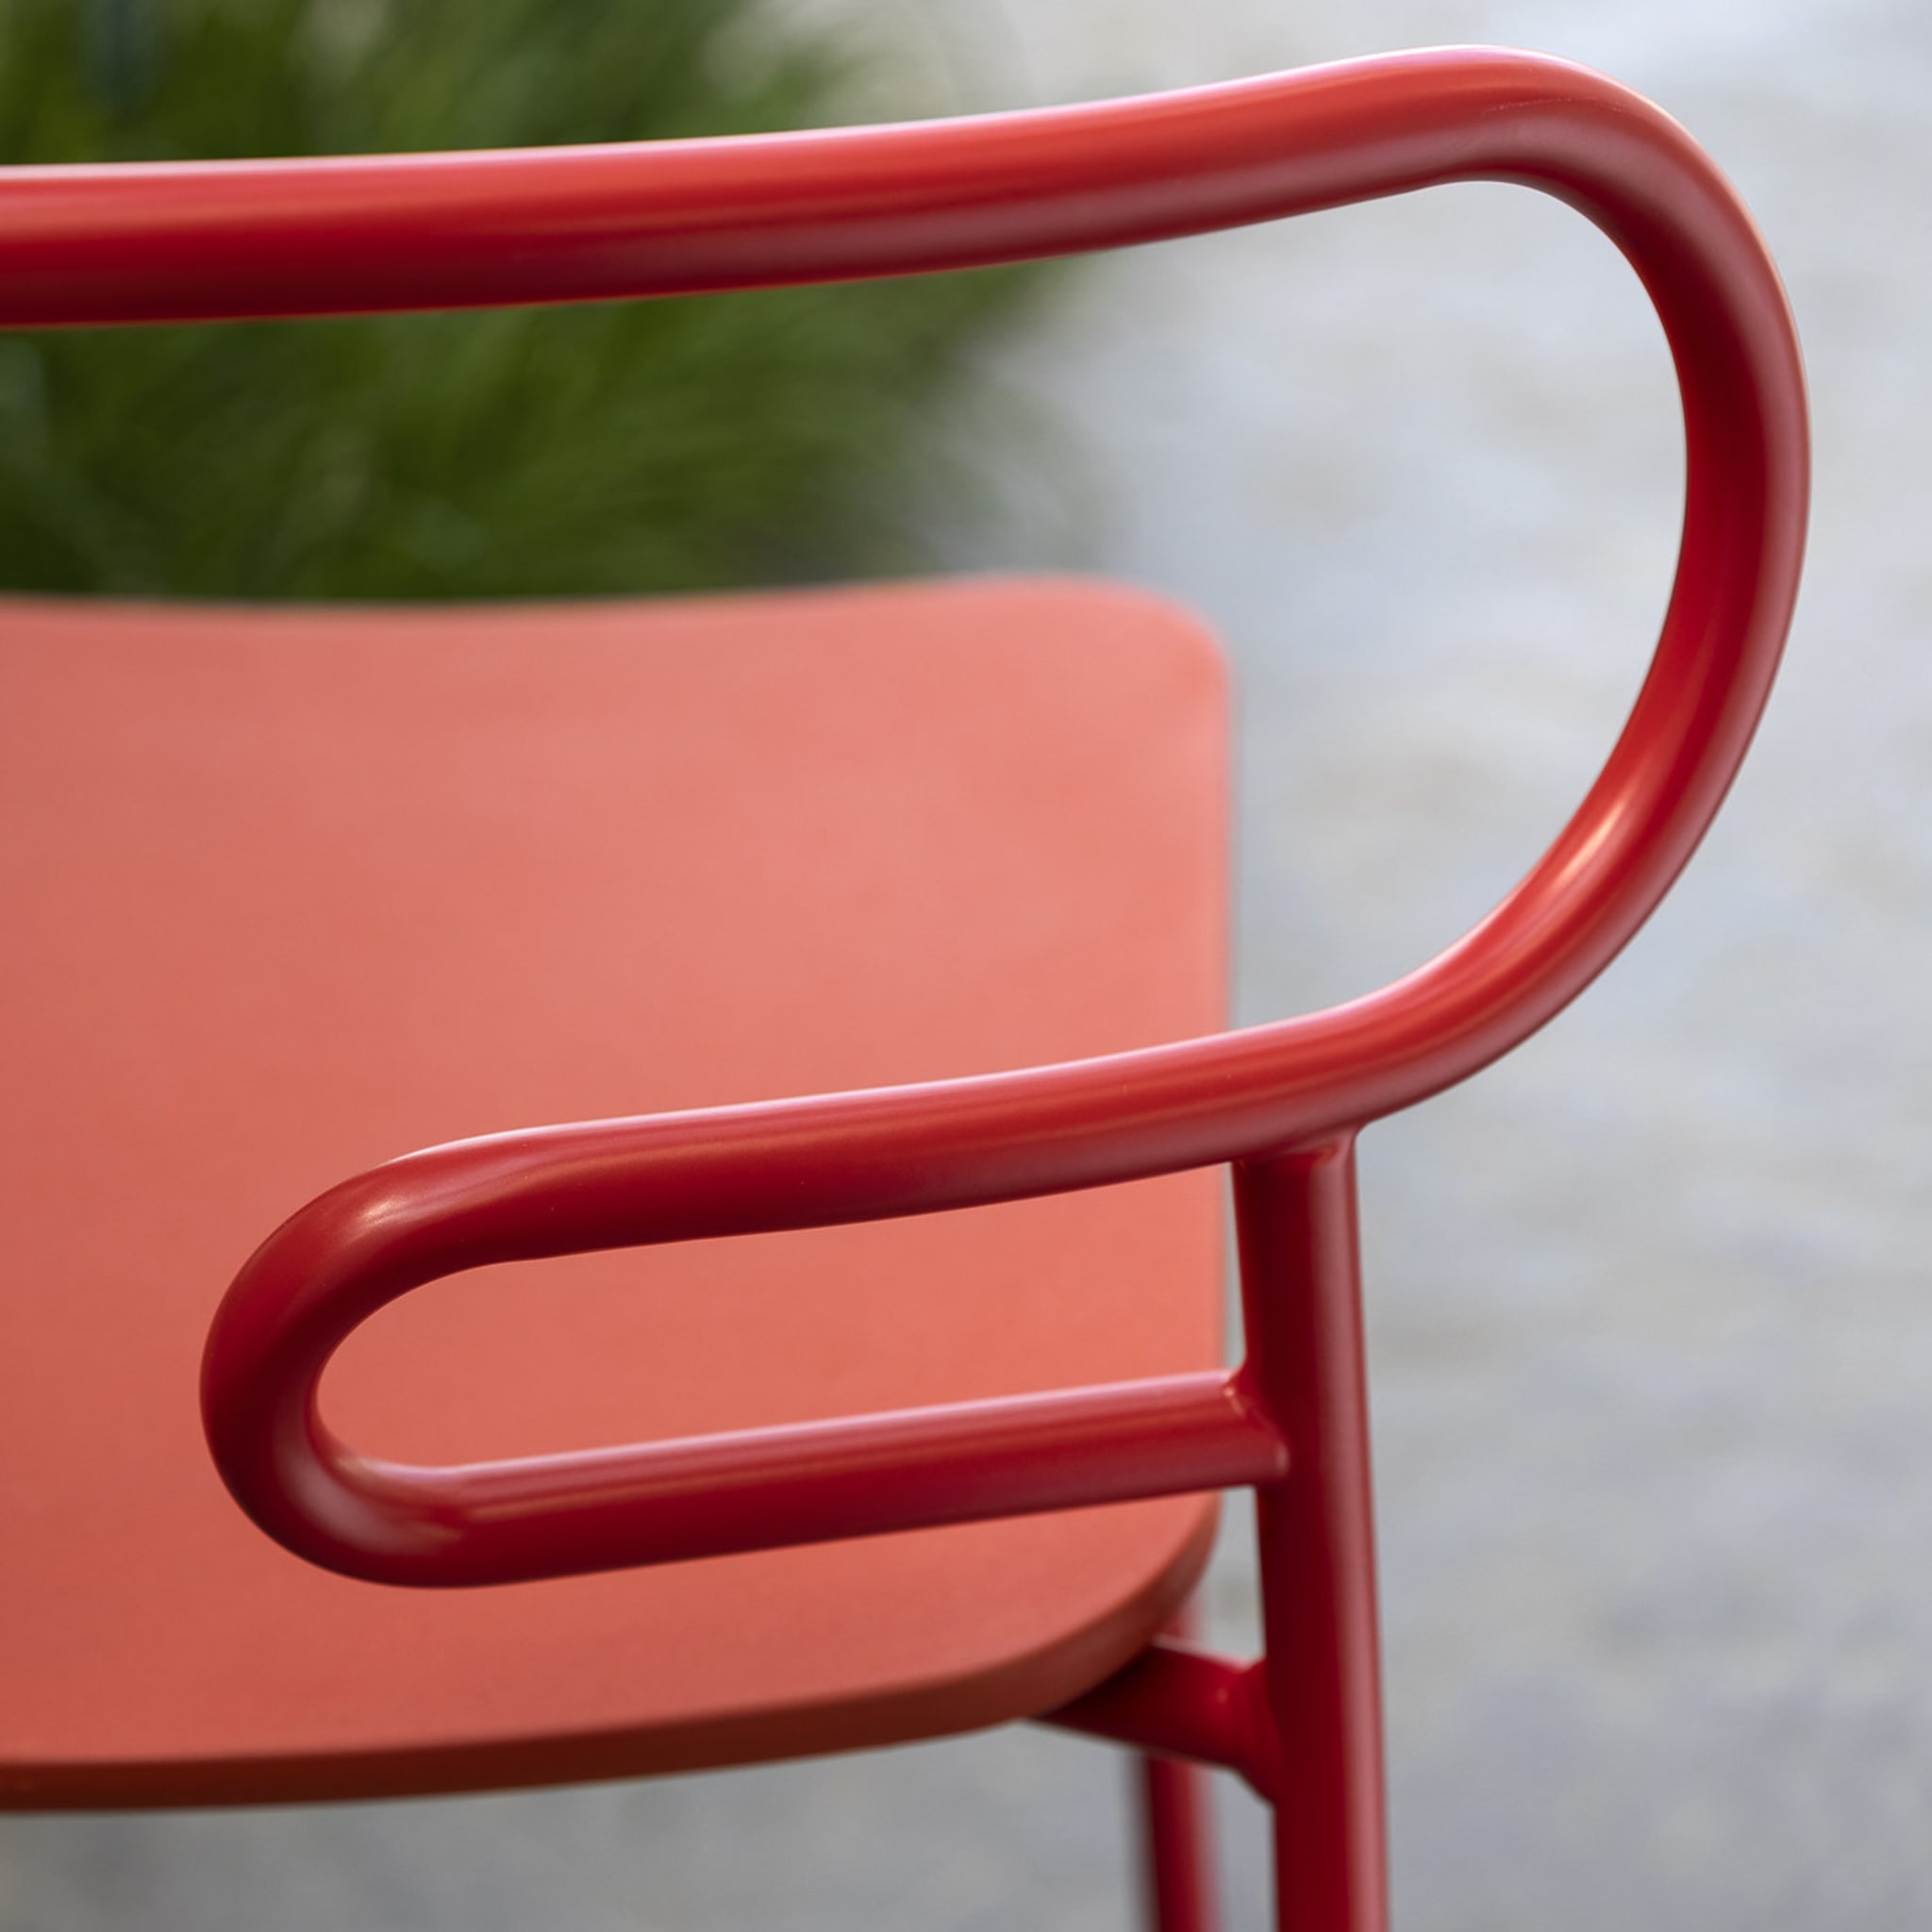 Genoa Red Bar Stool By Cesare Ehr - Alternative view 1